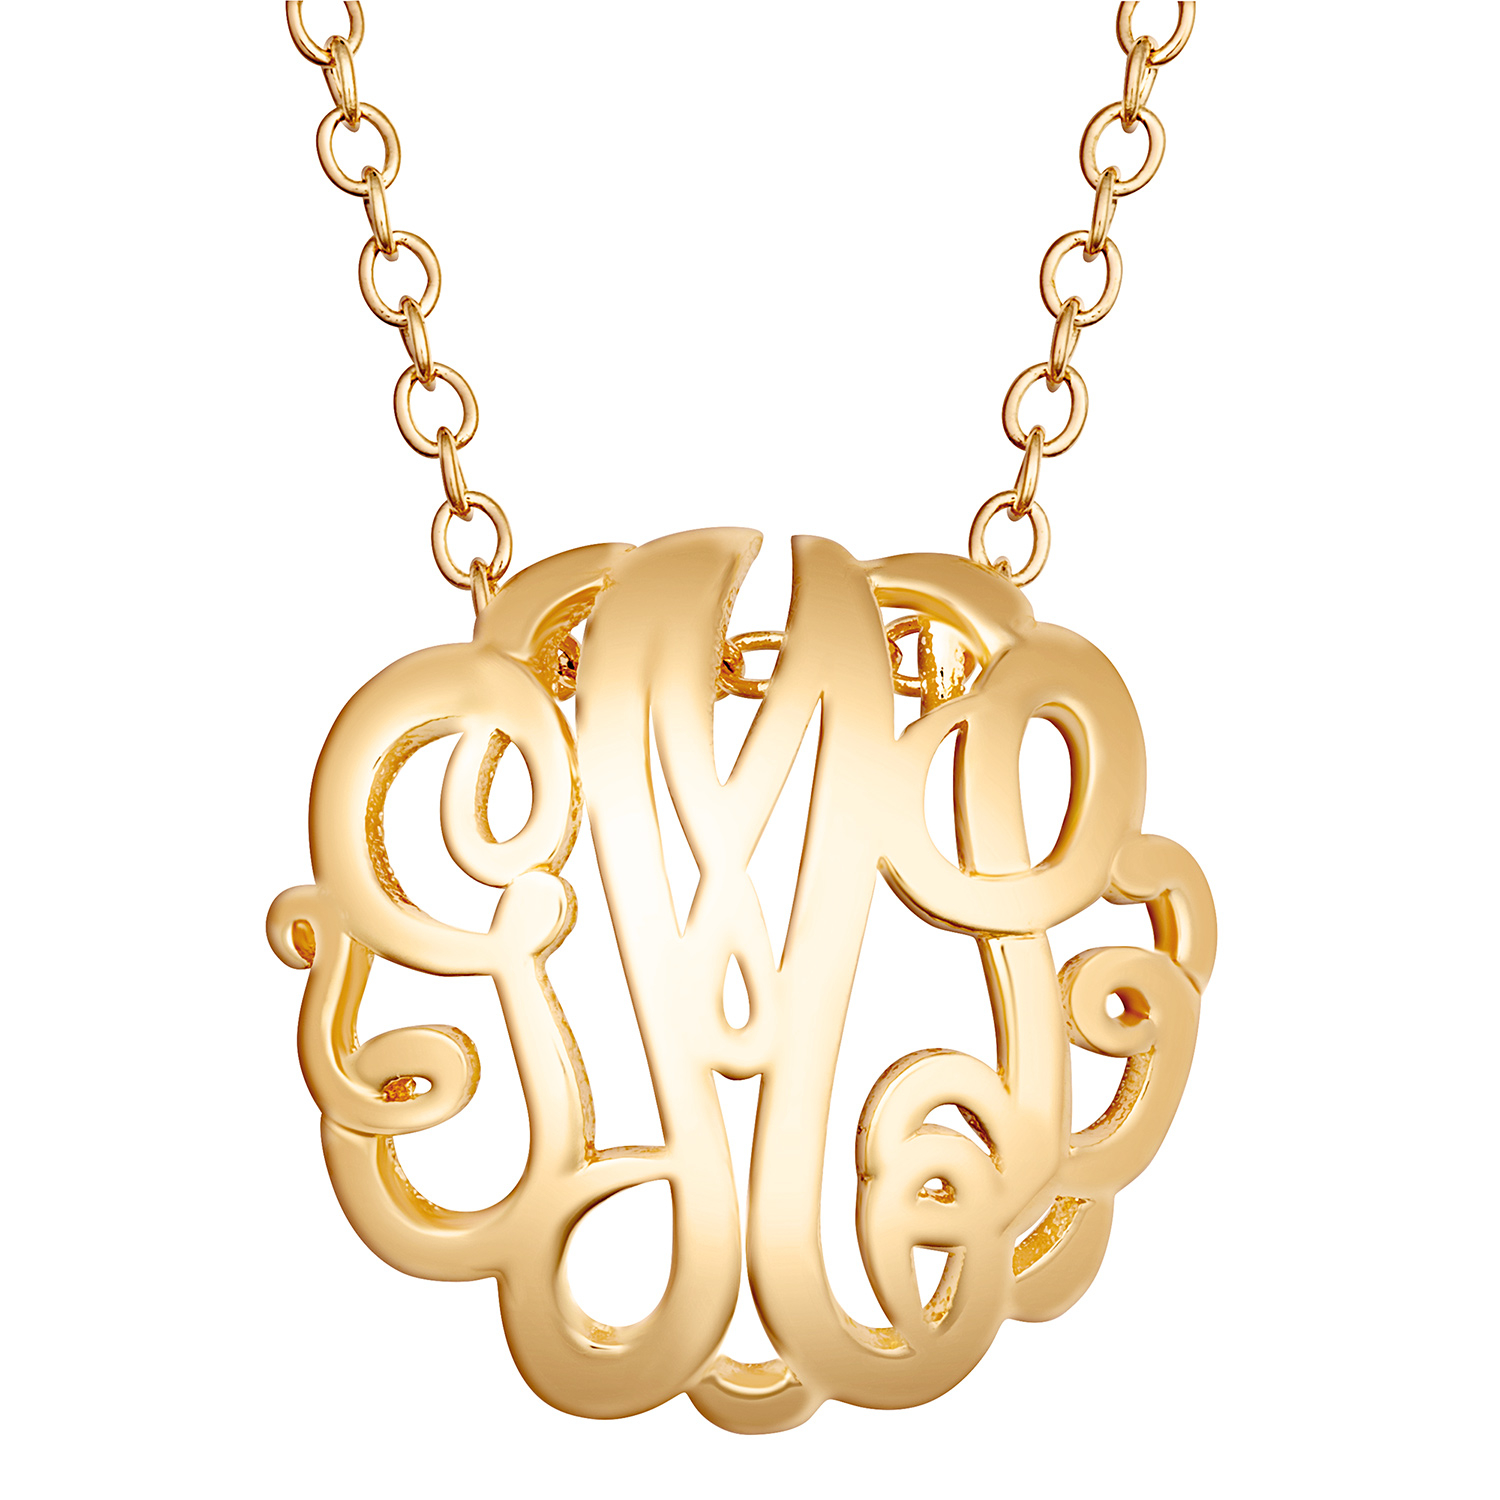 Single Sided 3-D 18x18mm Round Traditional Monogram Unframed Pendant